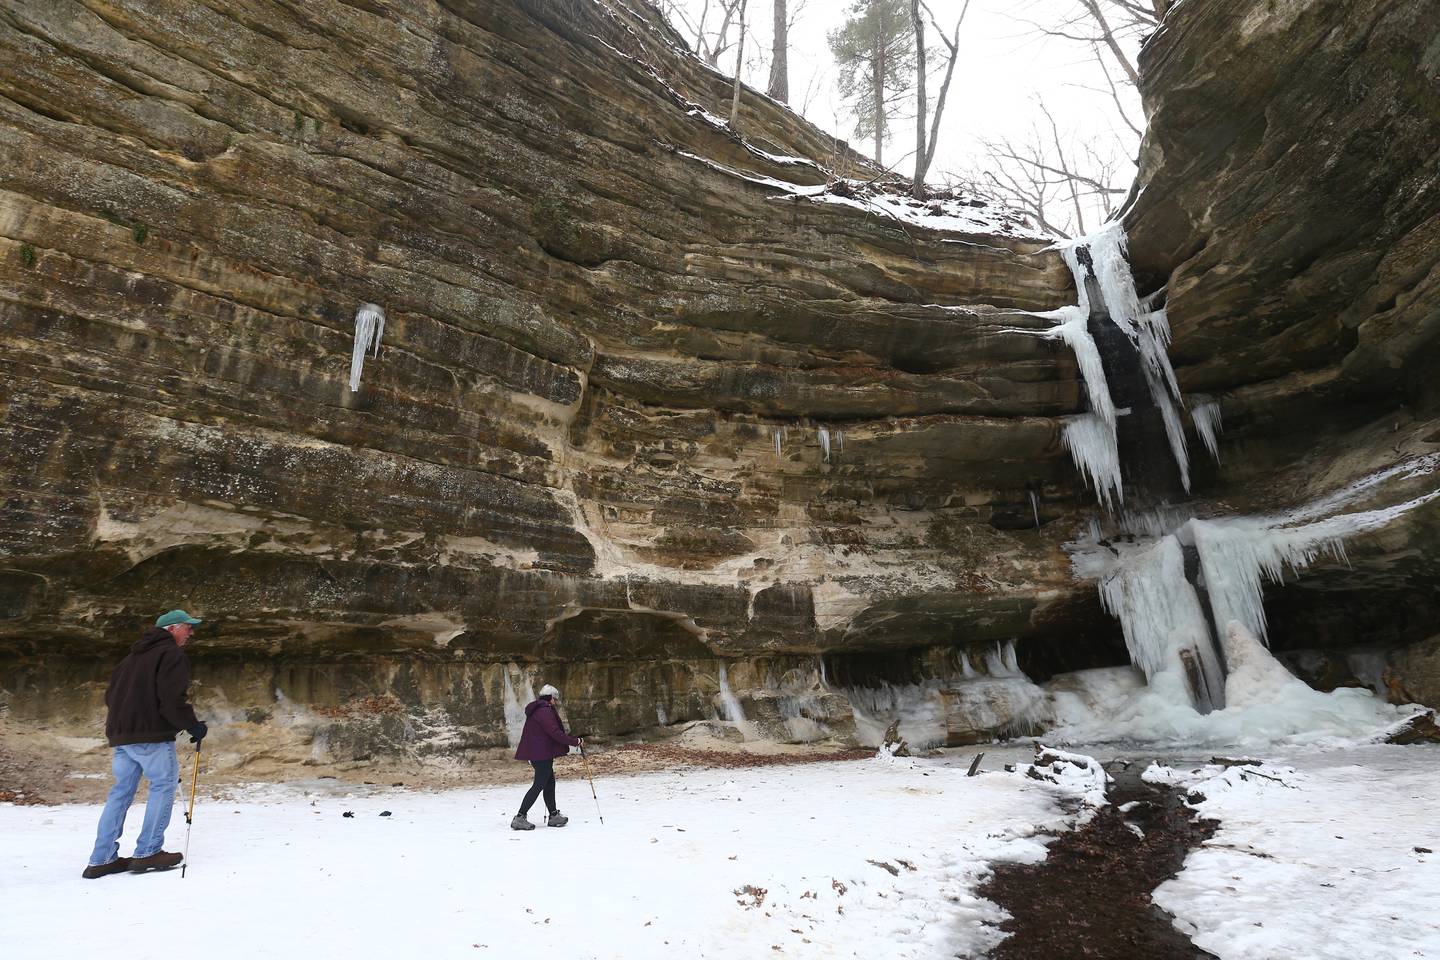 Gregg and Sue Flaherty, of Peru, take a winter hike to St. Louis Canyon at Starved Rock State Park on Wednesday Jan. 13. Some of the waterfalls in the canyons are beginning to freeze.